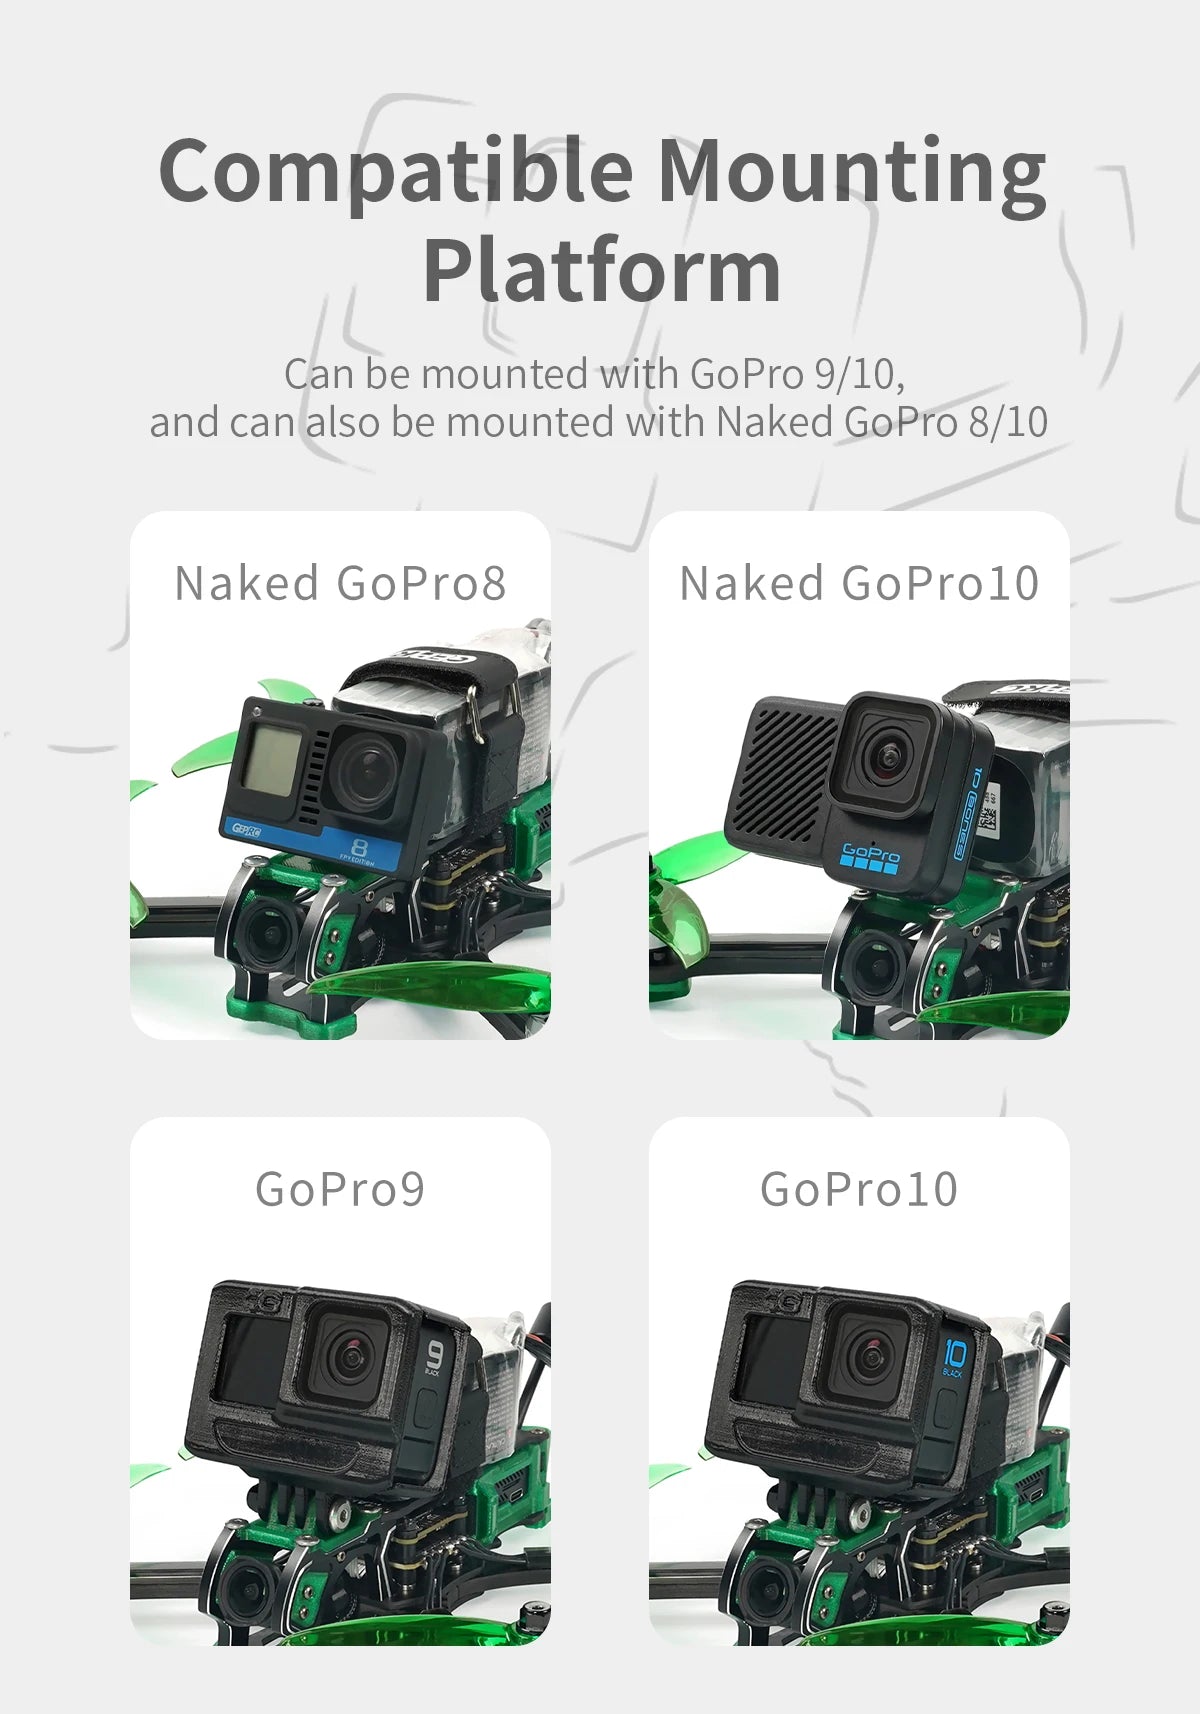 GEPRC MARK5 C HD O3 Freestyle FPV, Compatible Mounting Platform Can be mounted with Naked GoPro 9/10, and can also be